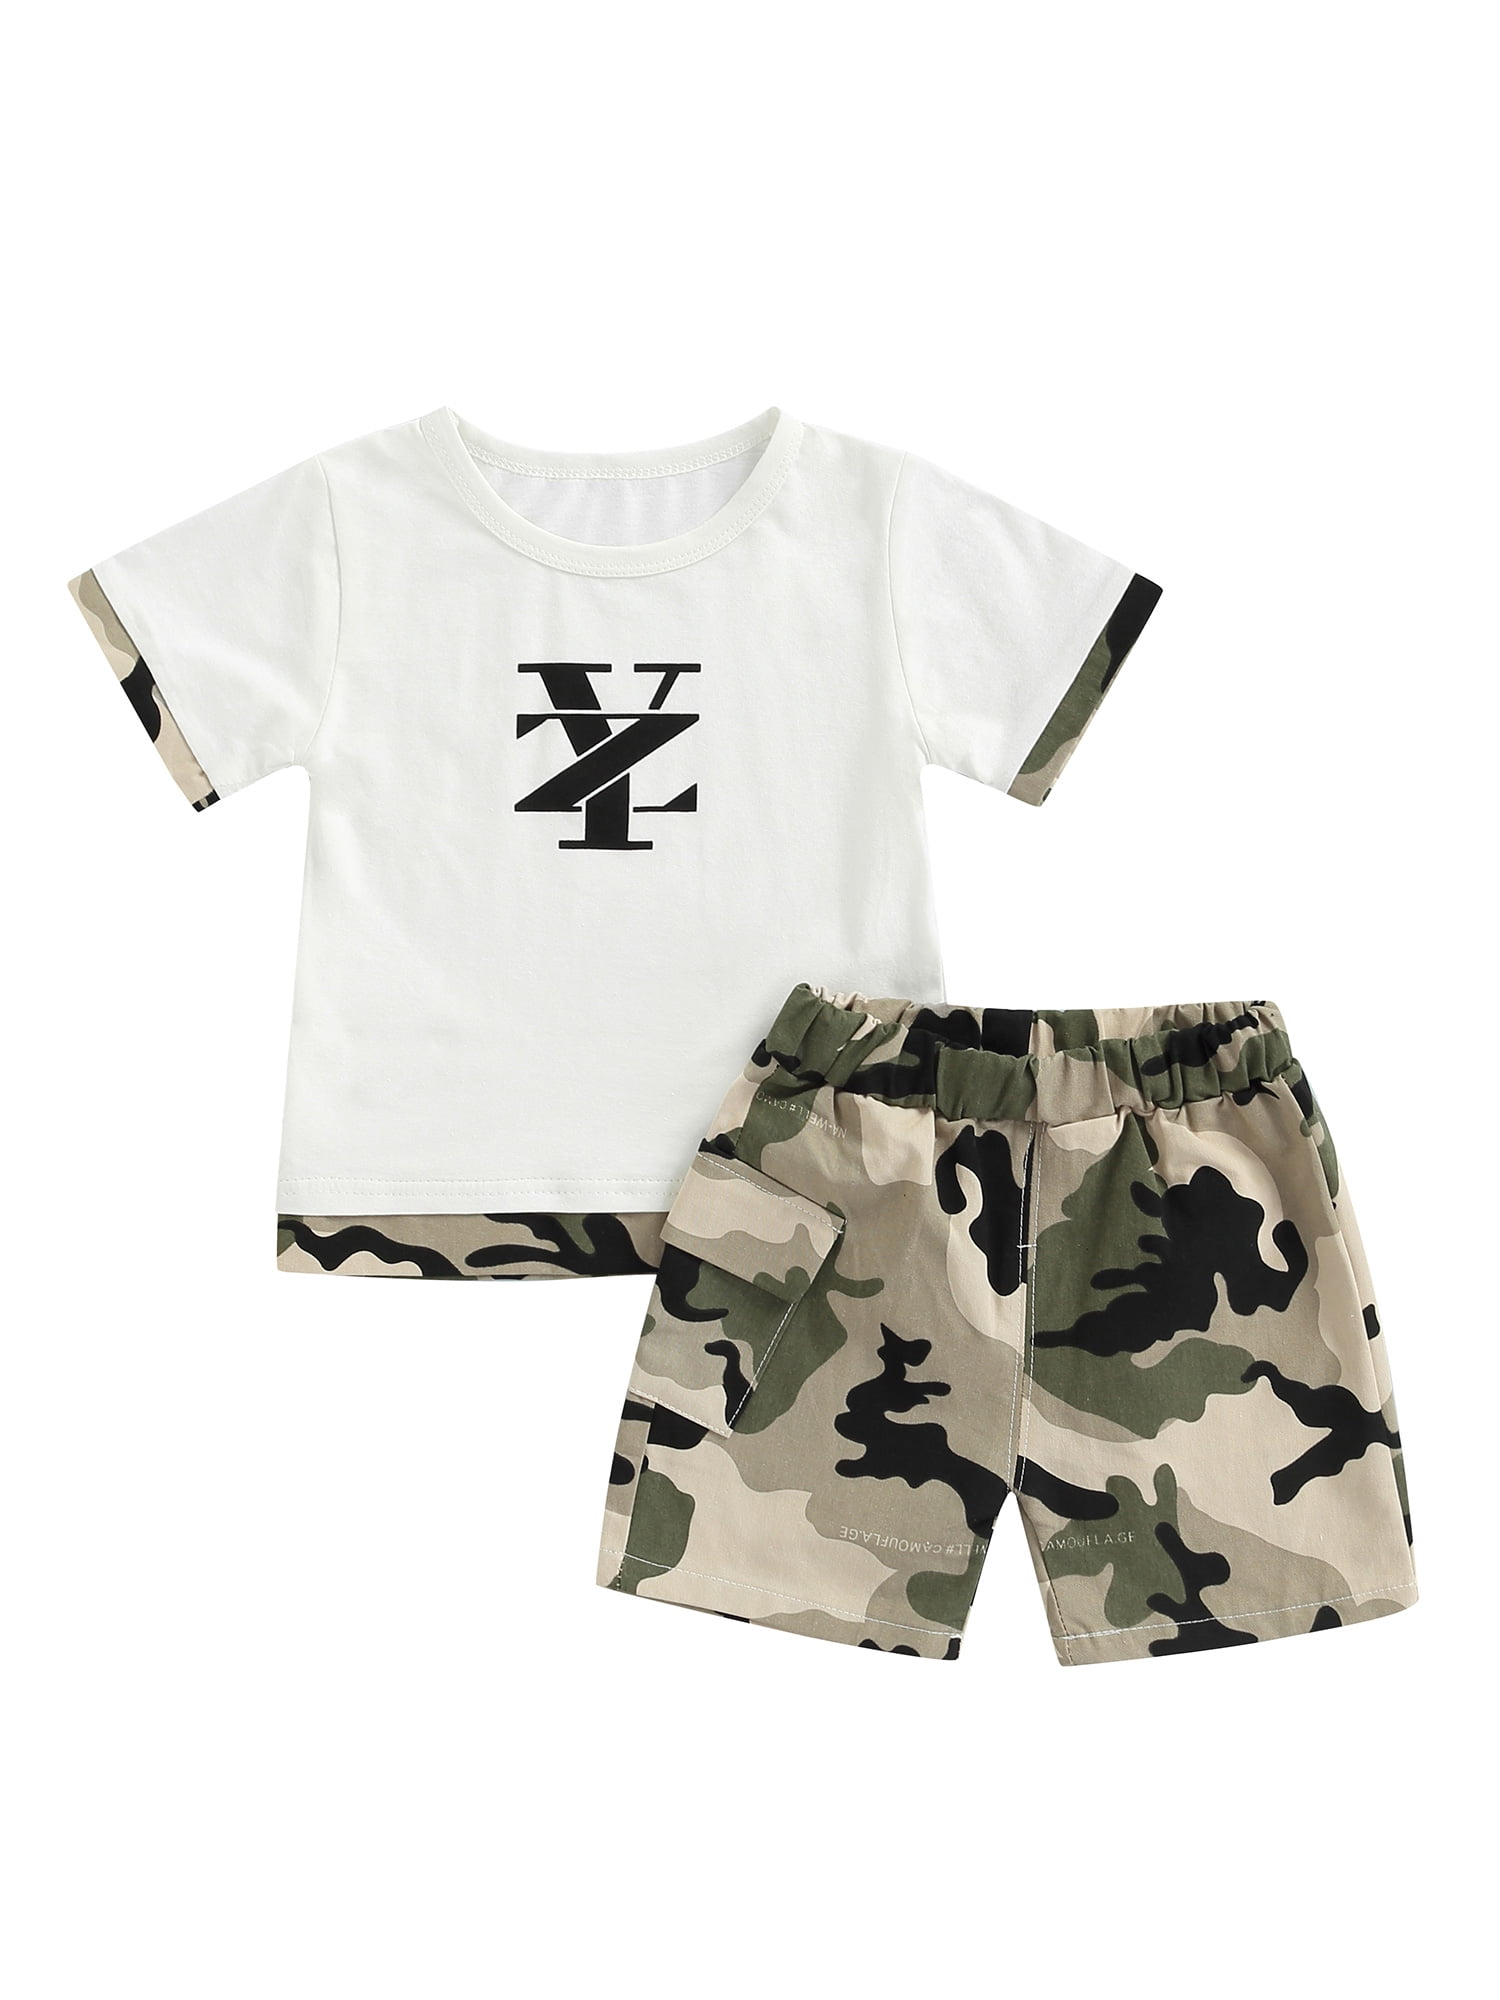 Mialoley Toddler Kids Boys 2 Pieces Outfit, Letter Print Round